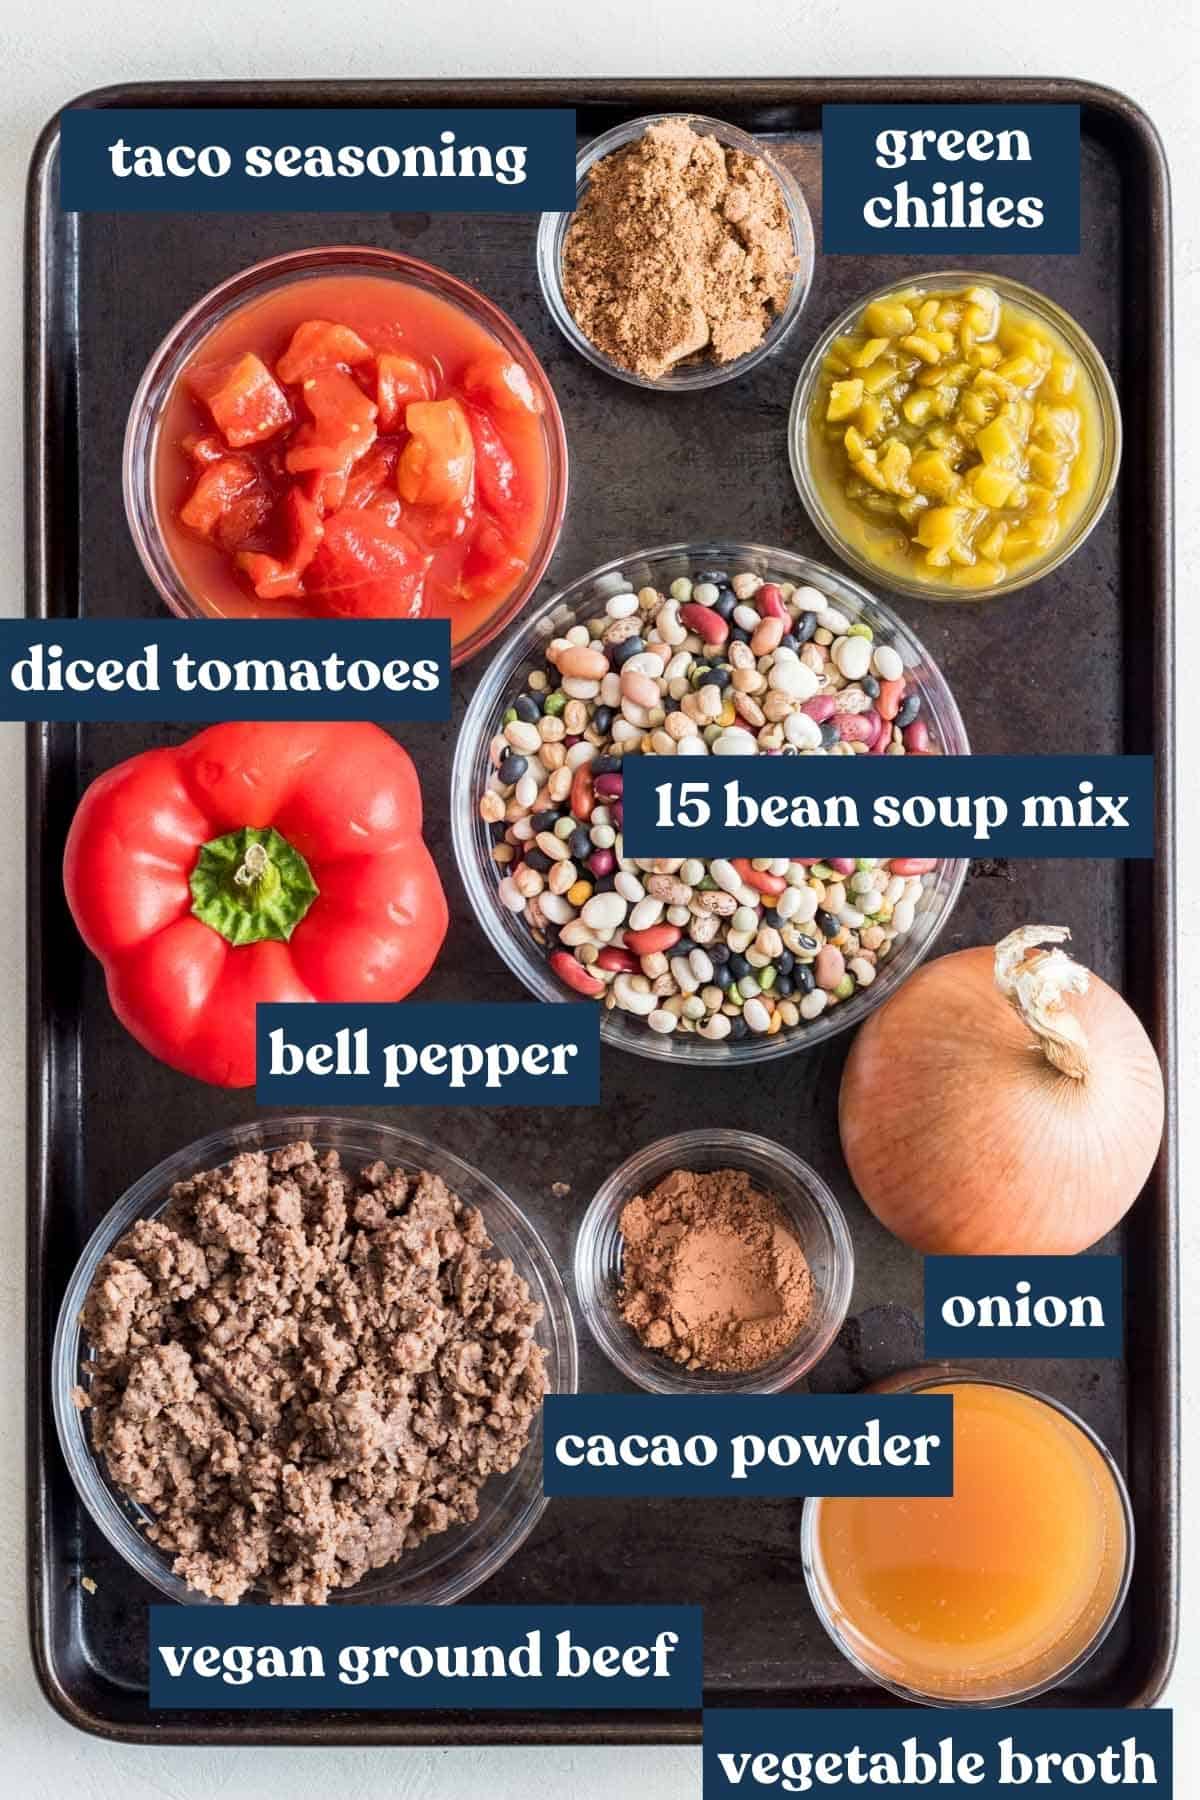 Ingredients needed for chili measured and labeled on baking sheet.